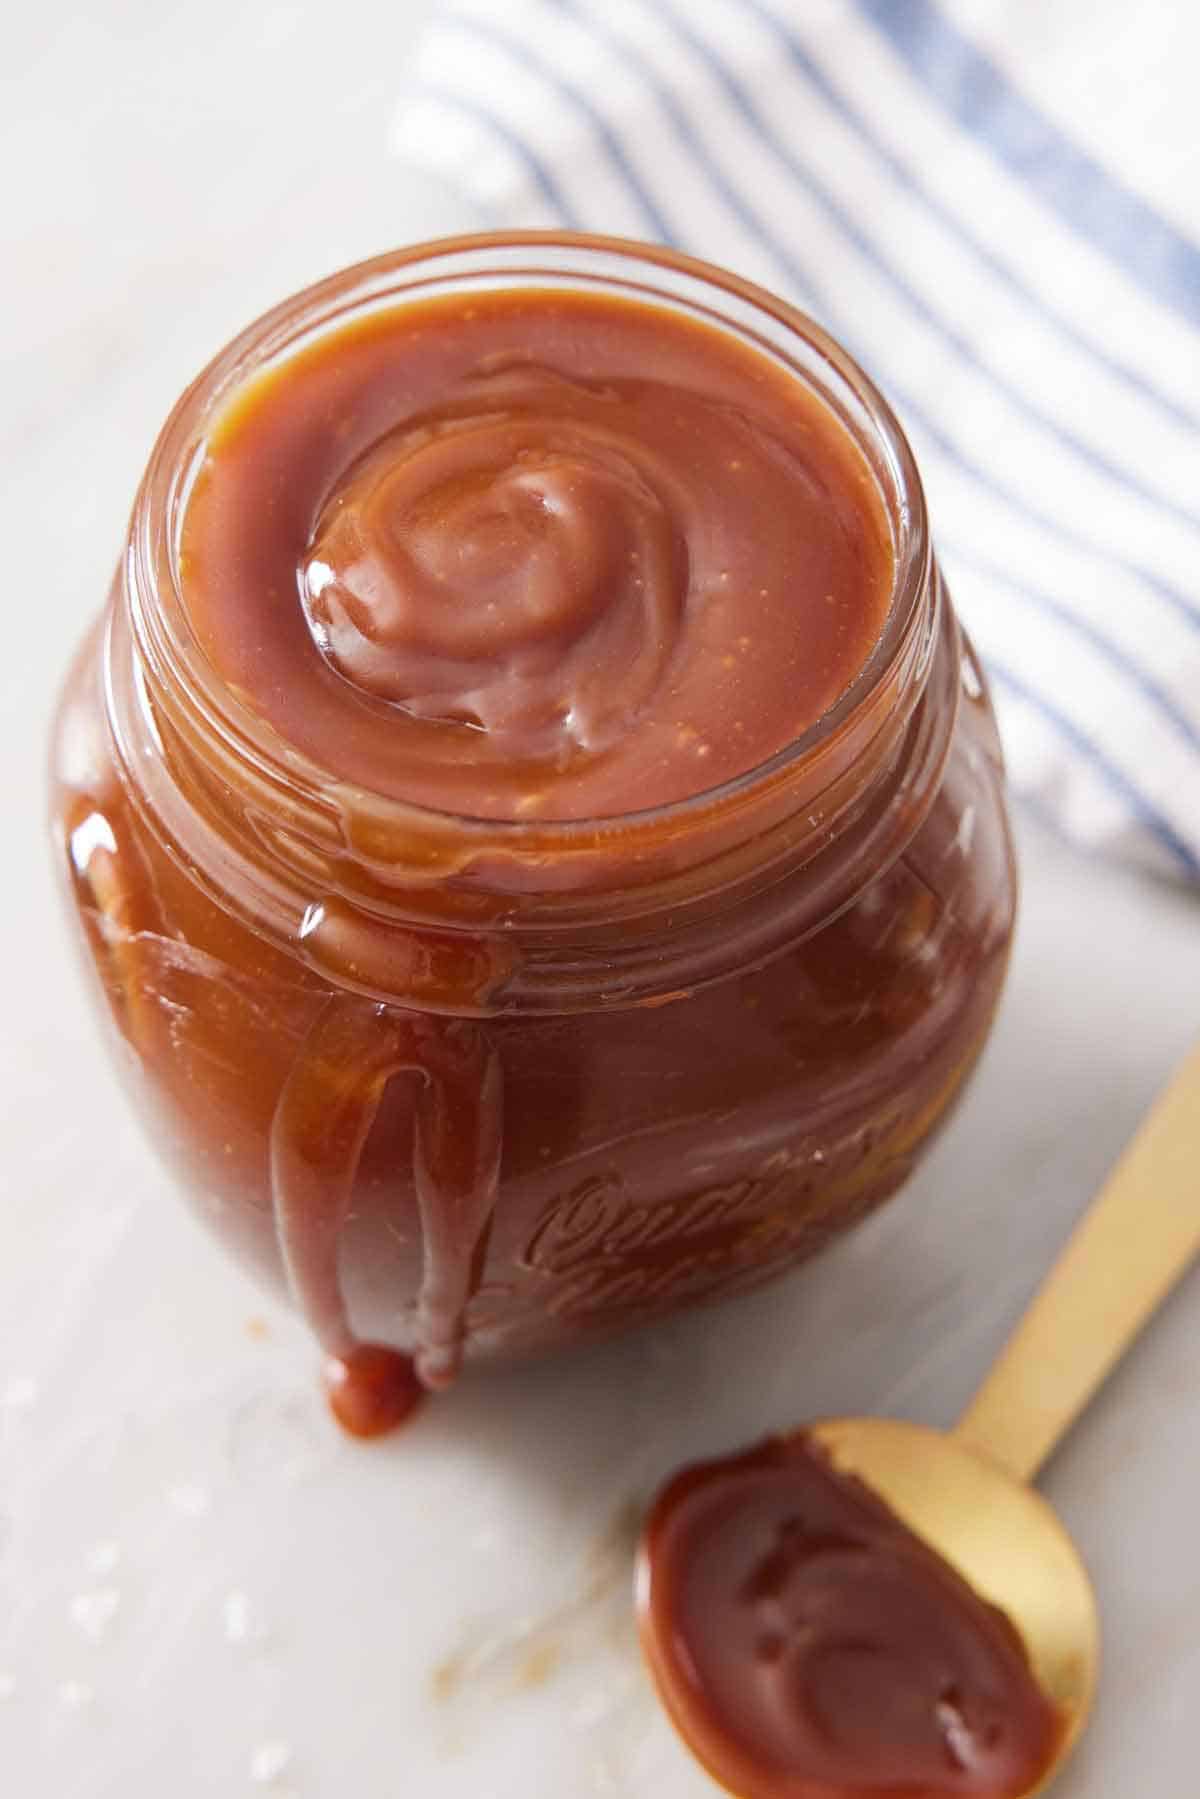 A slightly overhead view of a jar of caramel sauce with a spoon on the side.